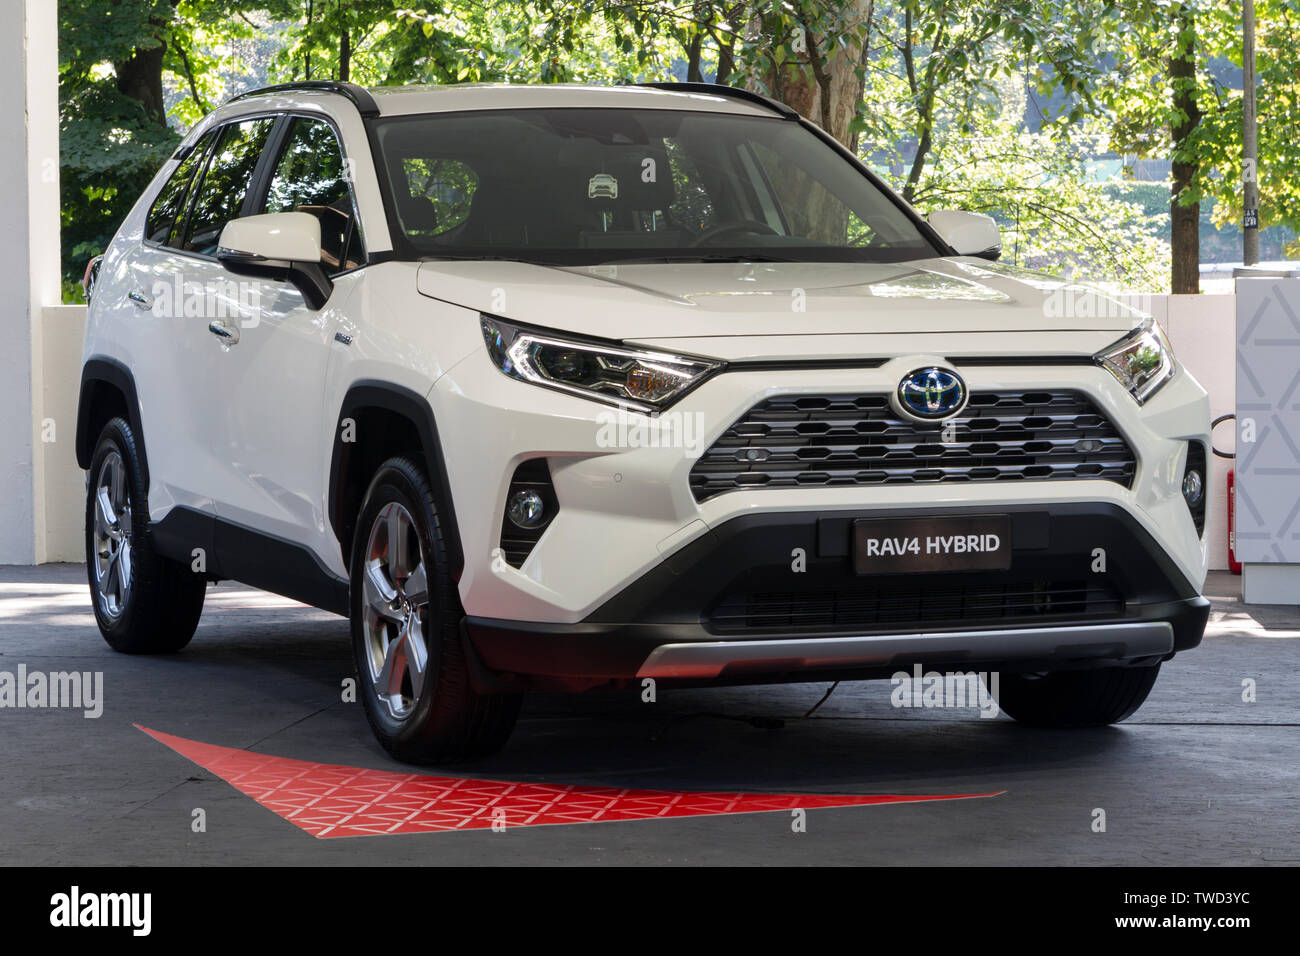 A Toyota RAV4 hybrid car. 2019 edition of Parco Valentino car show hosts cars by many brands and car designers in Valentino Park in Torino, Italy. Stock Photo